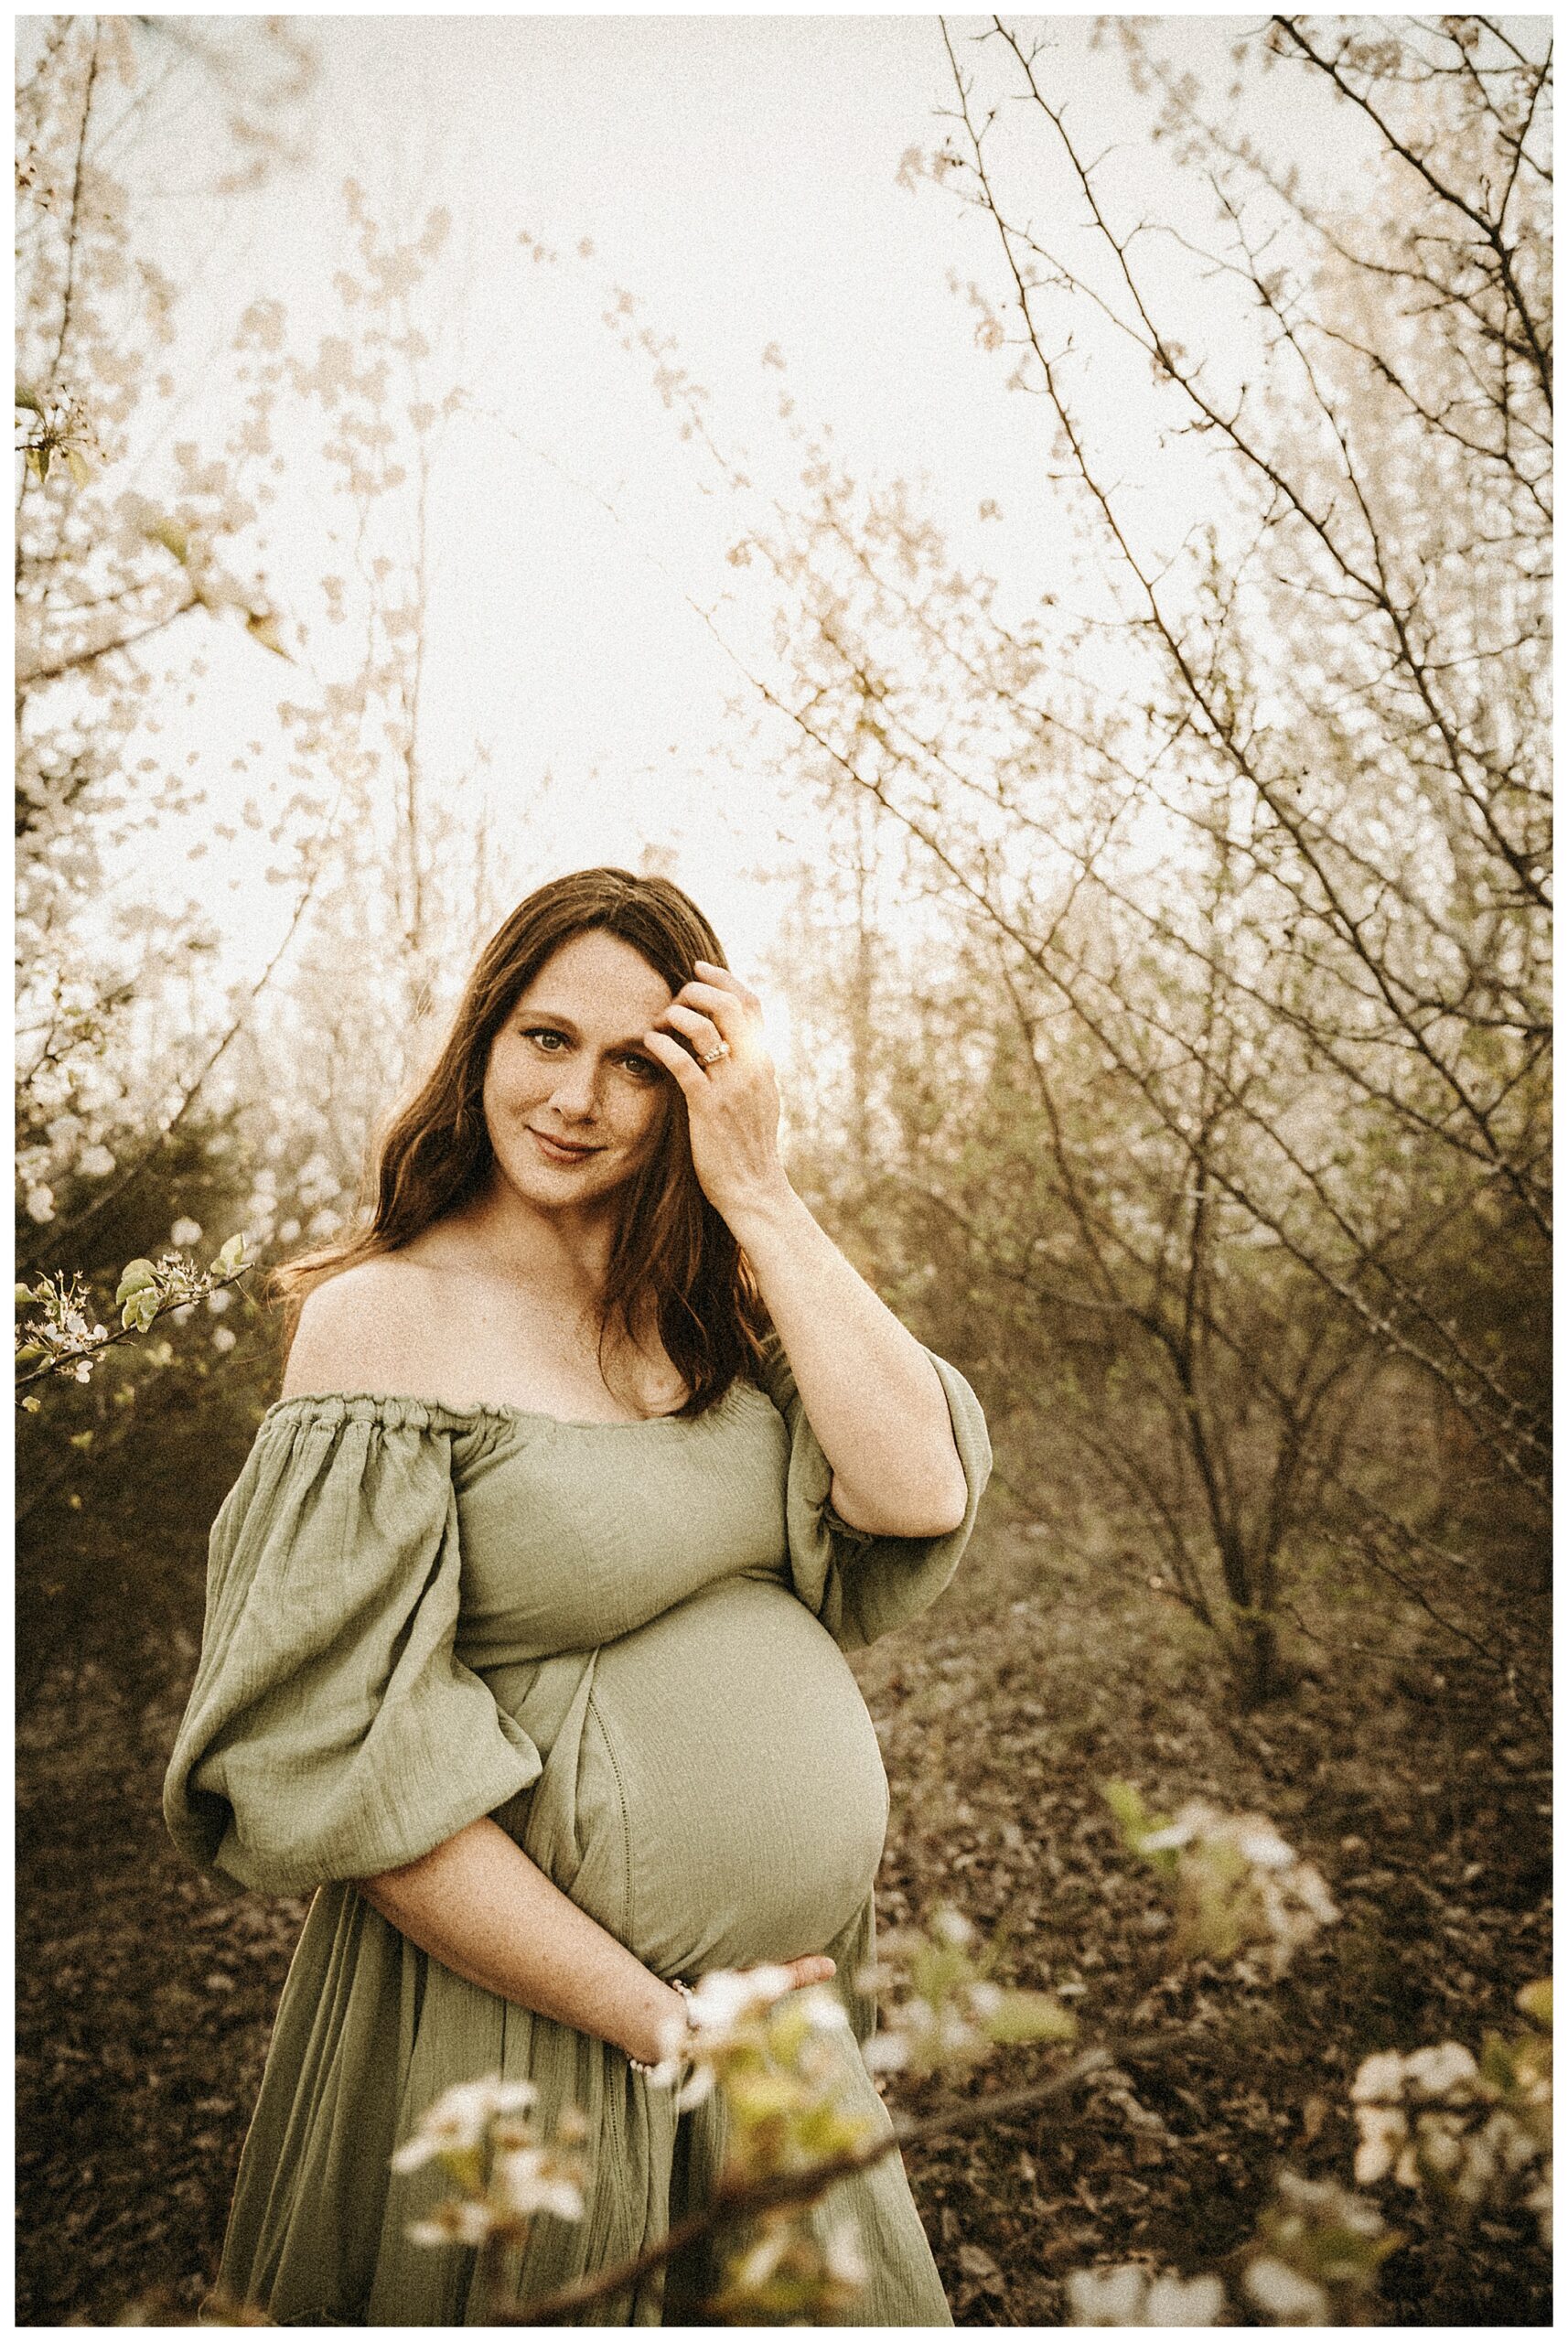 expecting mother in Missouri blooming trees in spring outdoor family session with sunset in background, vintage looking family photographer O'fallon Missouri